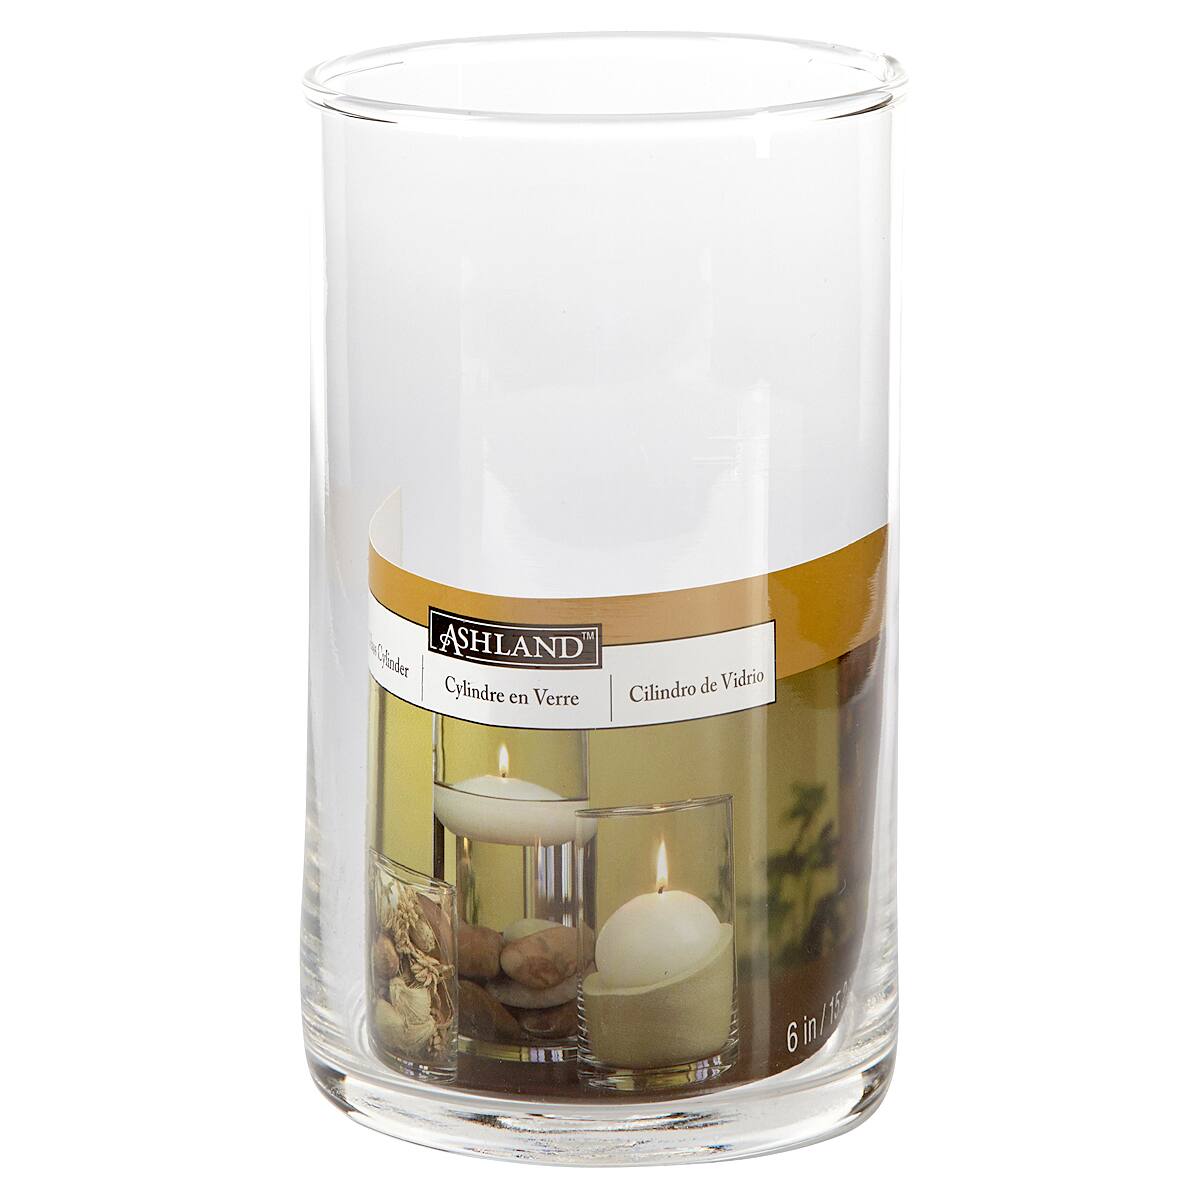 Purchase The Glass Cylinder Candle Holder By Ashland® At